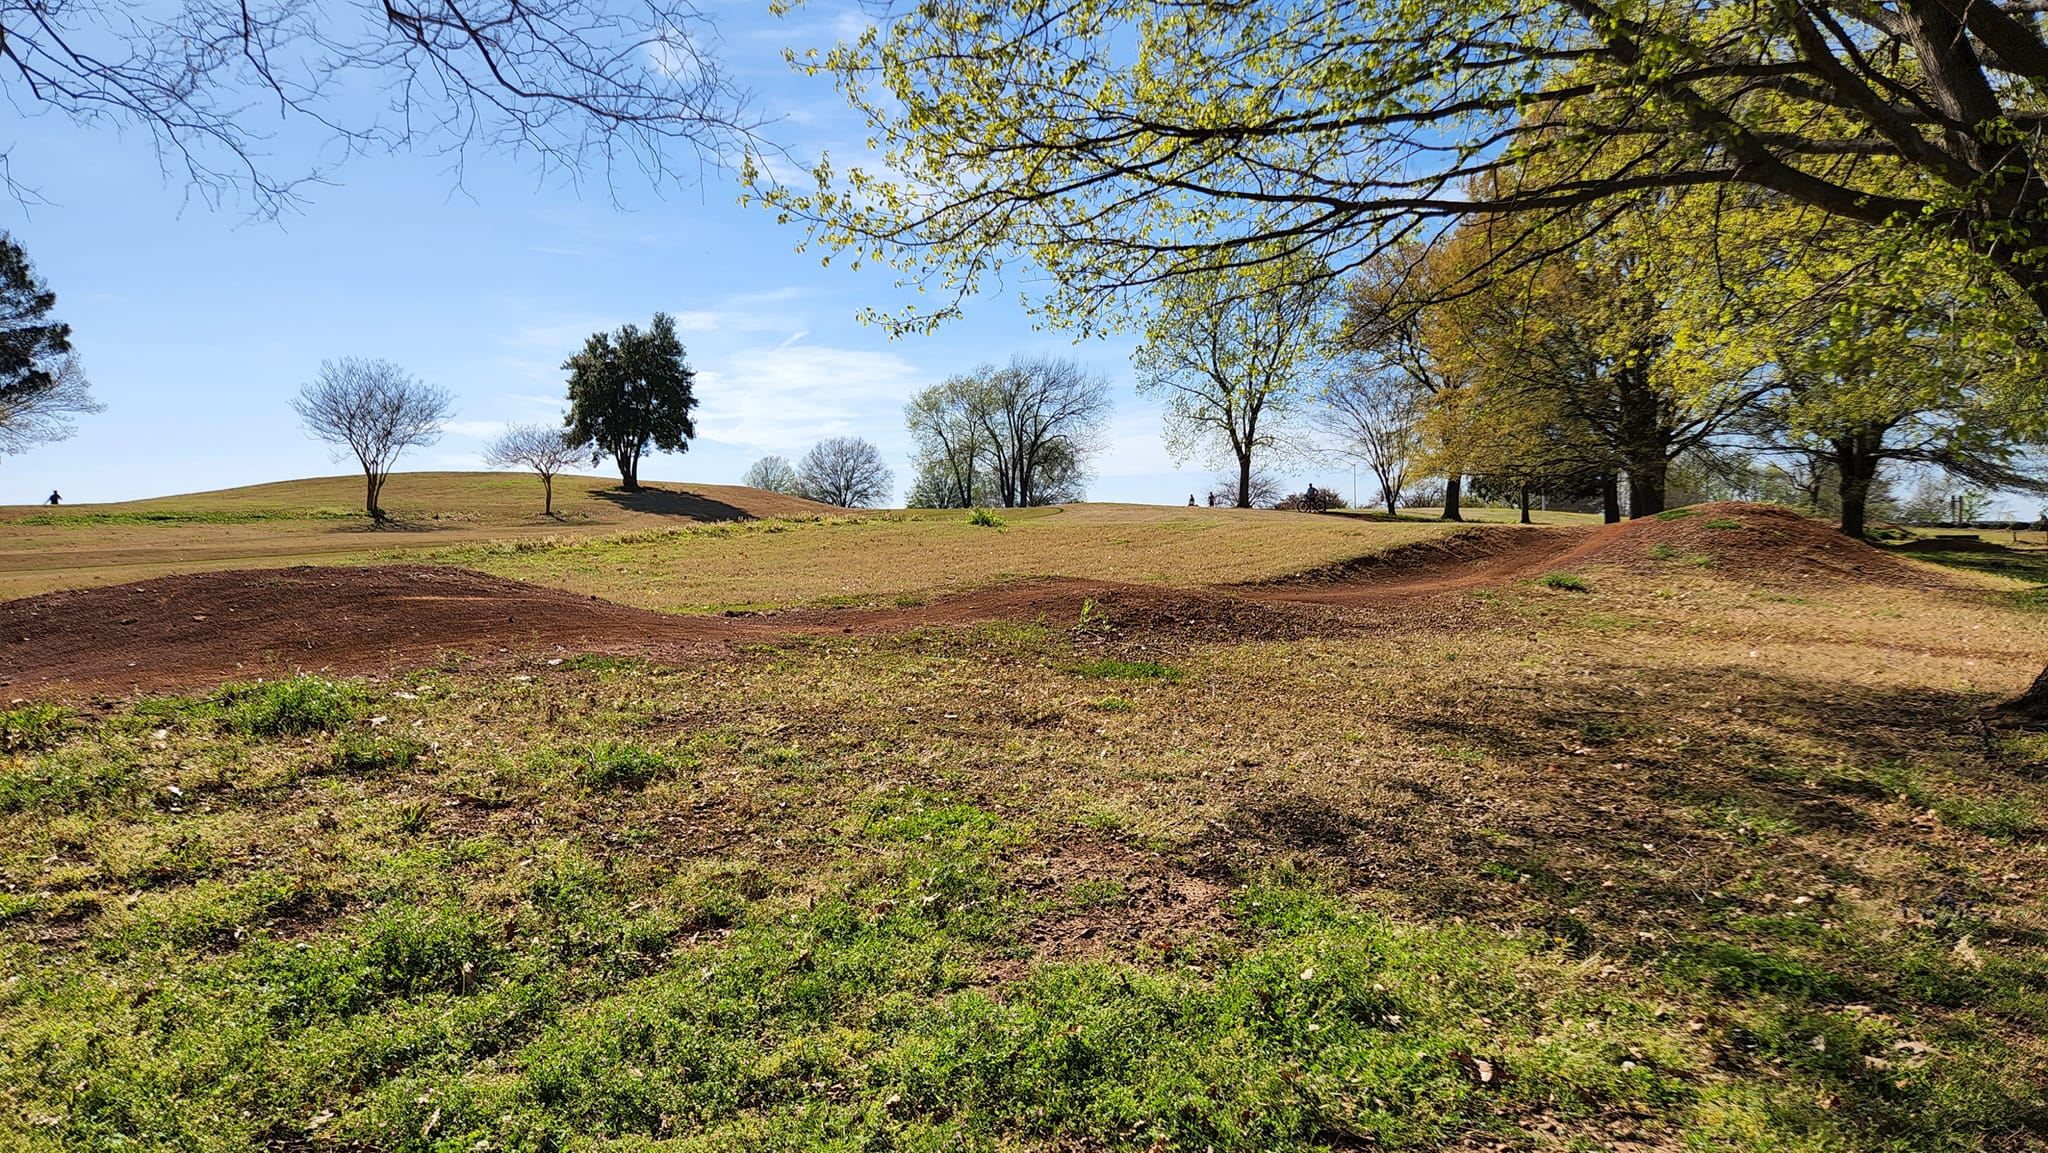 Photo of the landscape for the mountain bike course showing hills and rugged dirt path